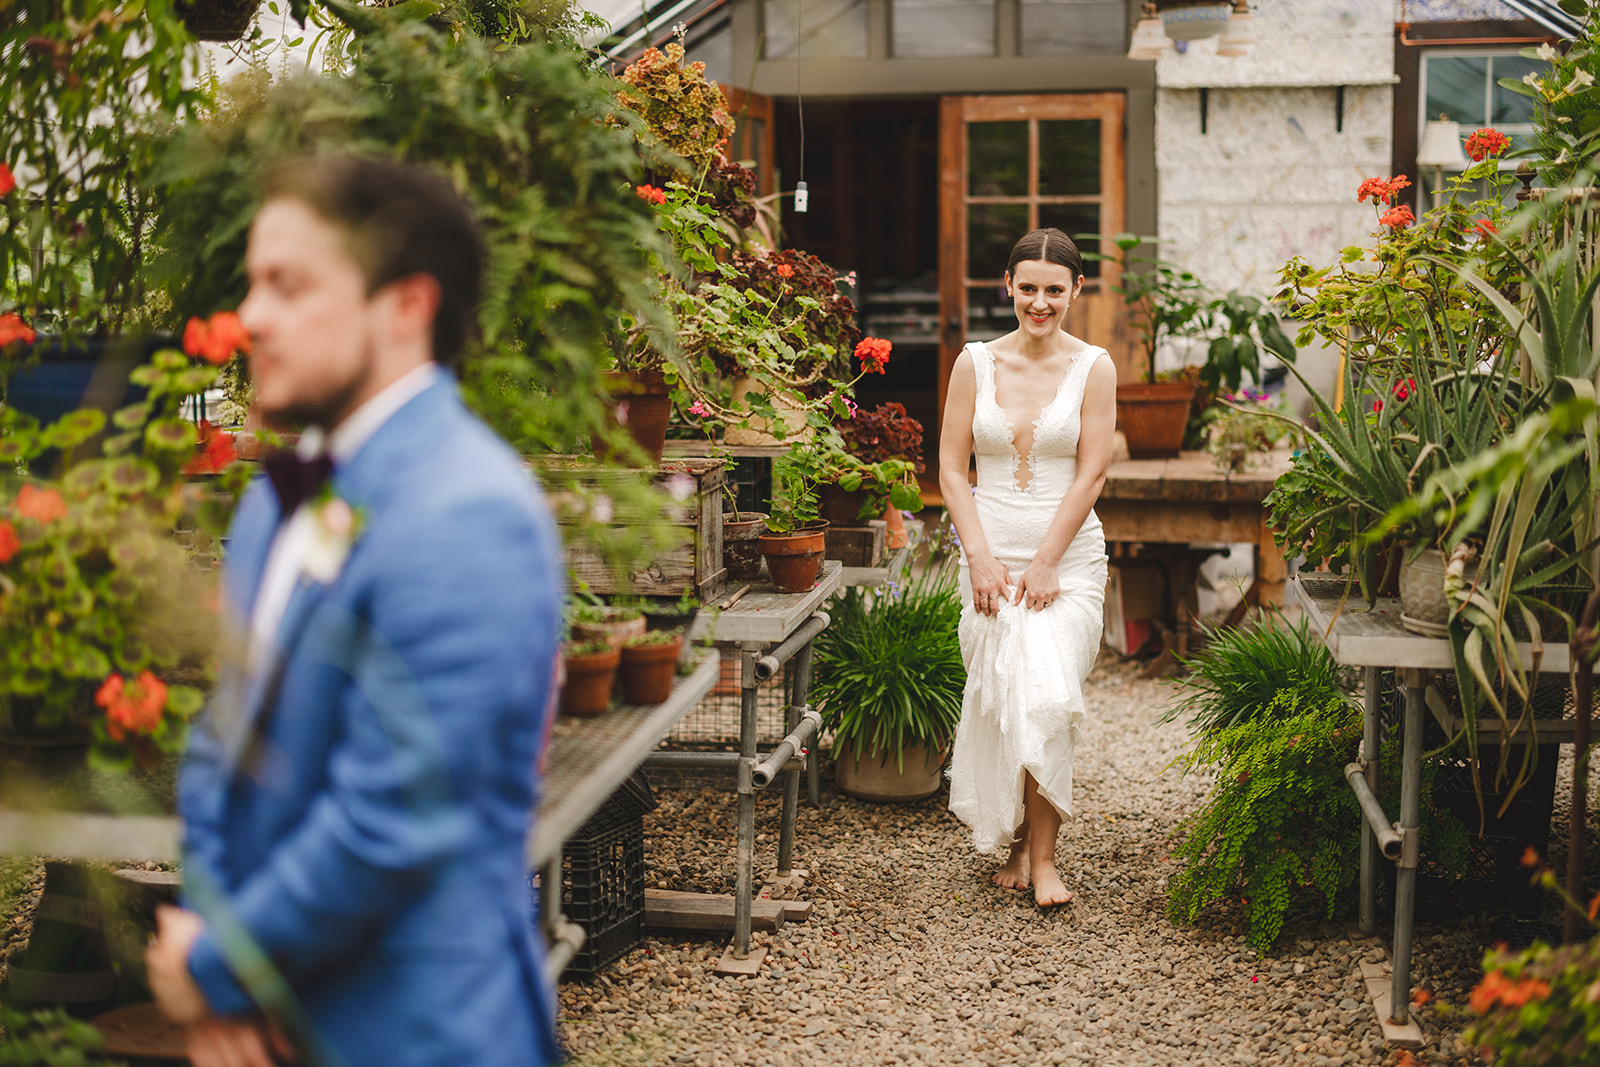 a barefoot bride wearing a white dress approaches her groom in a blue suit inside a greenhouse 